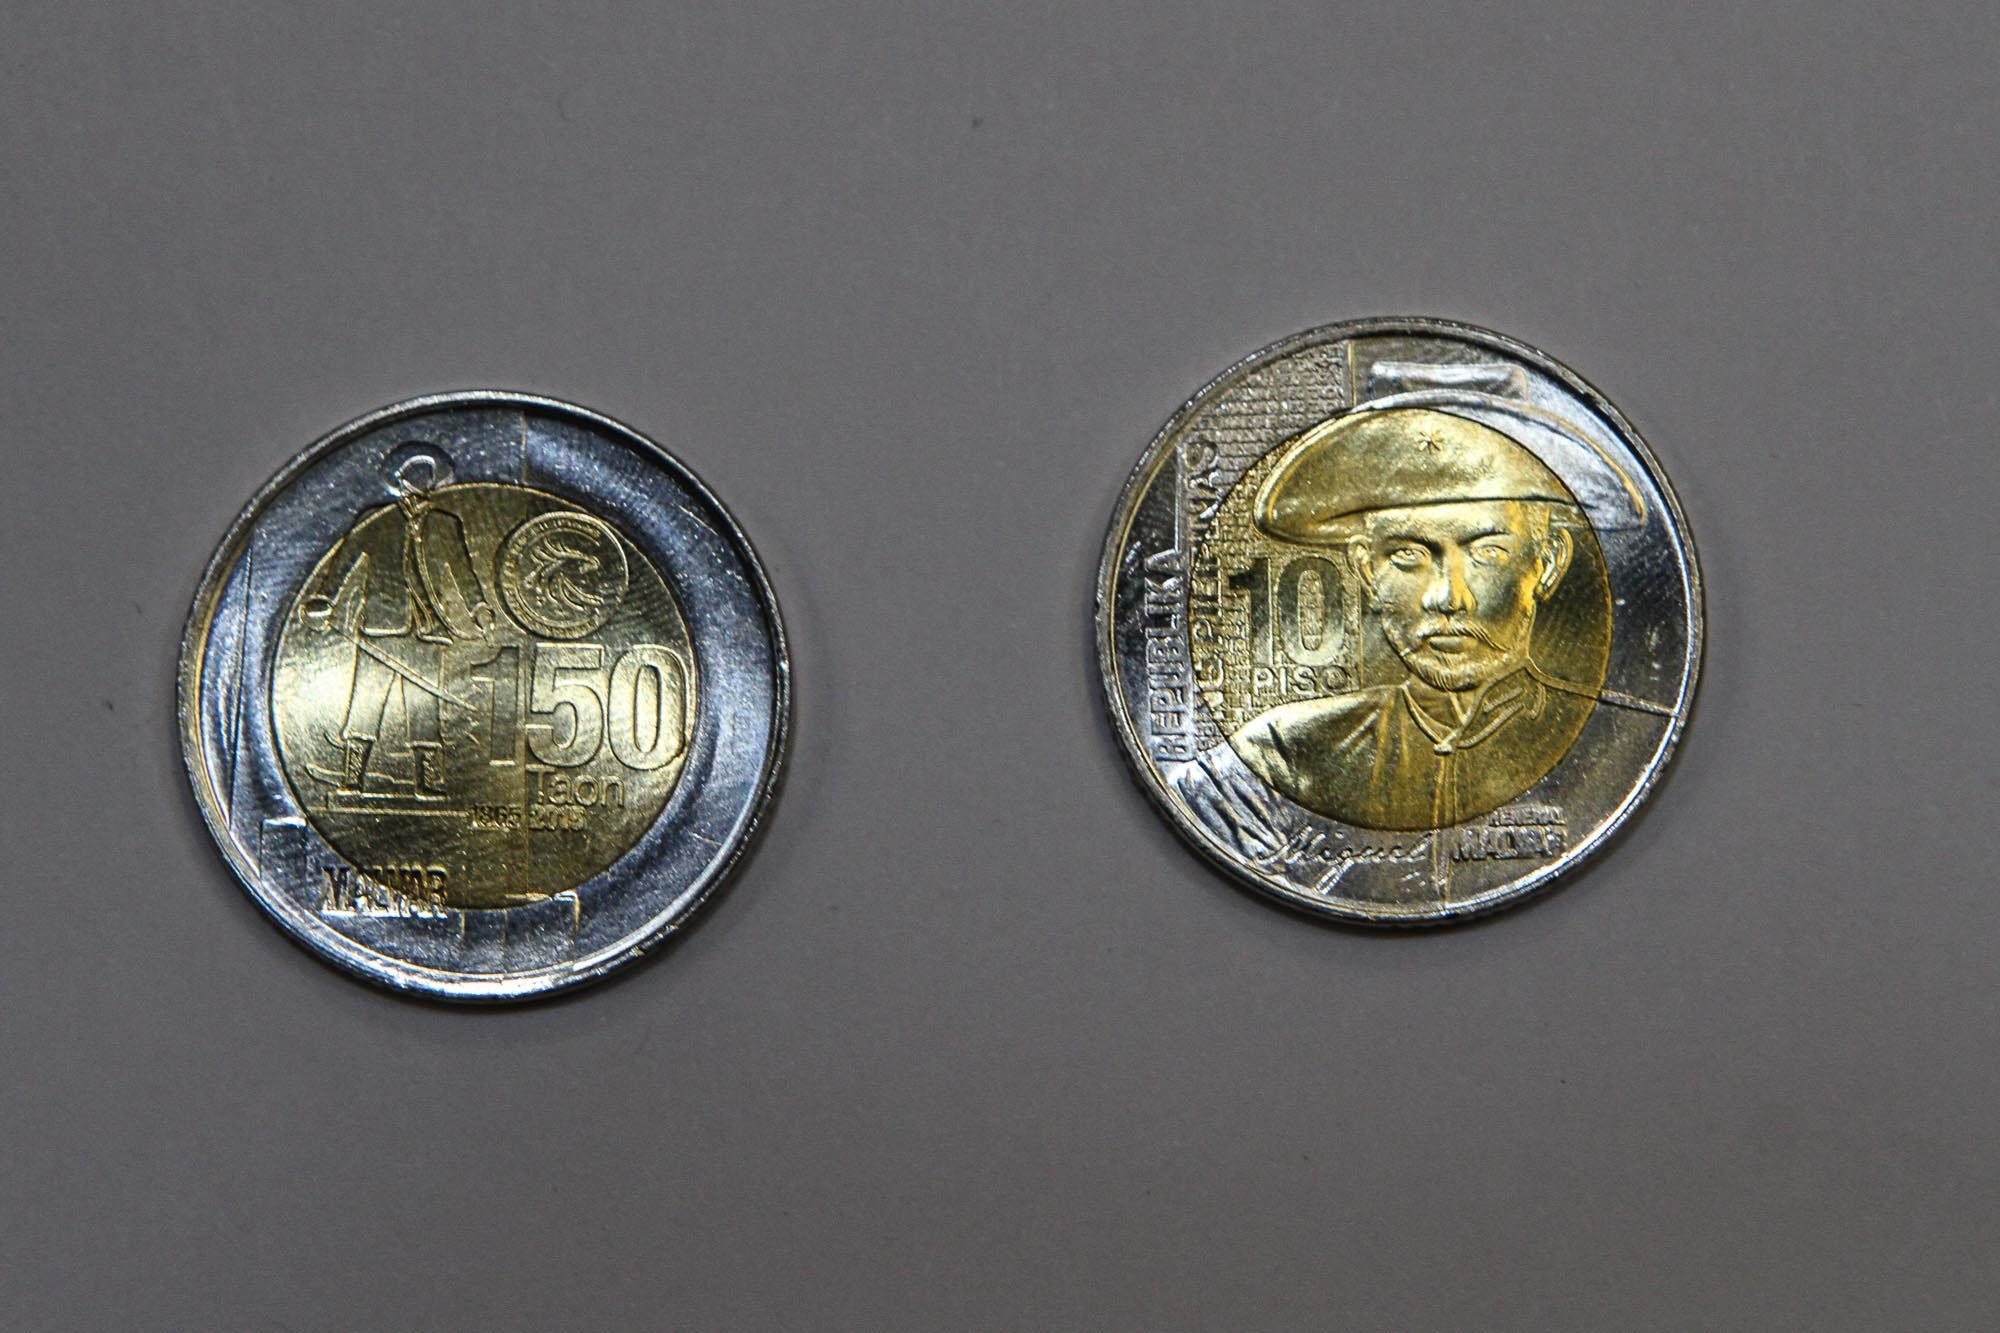 FEATURES. The BSP issued the commemorative coin for the 150th birth anniversary of Philippine hero Miguel Malvar. The coin will be available starting Tuesday, December 22 at BSP offices and branches. Photo by Lito Boras/Rappler 